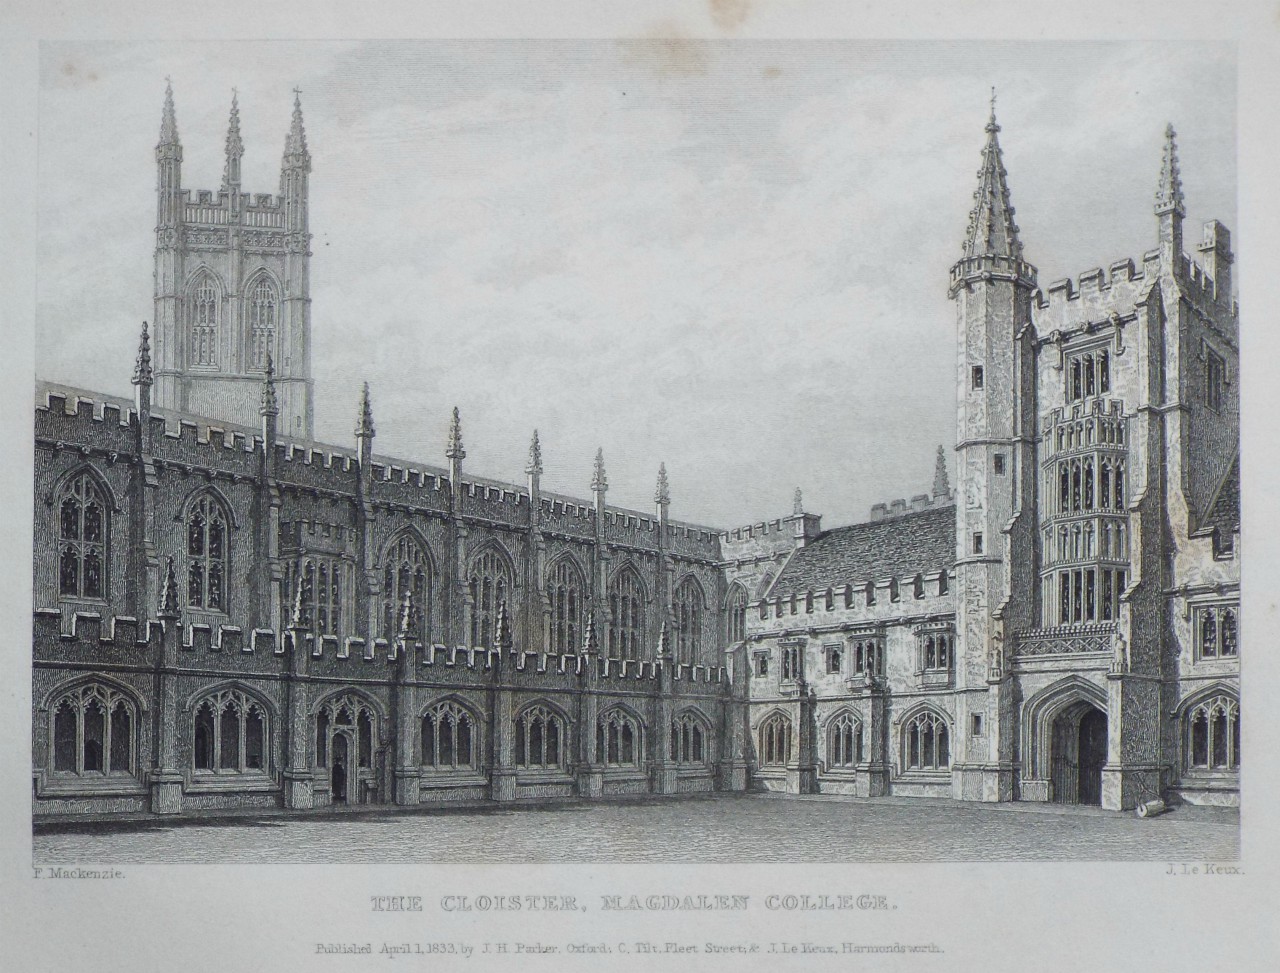 Print - The Cloister, Magdalen College. - Le